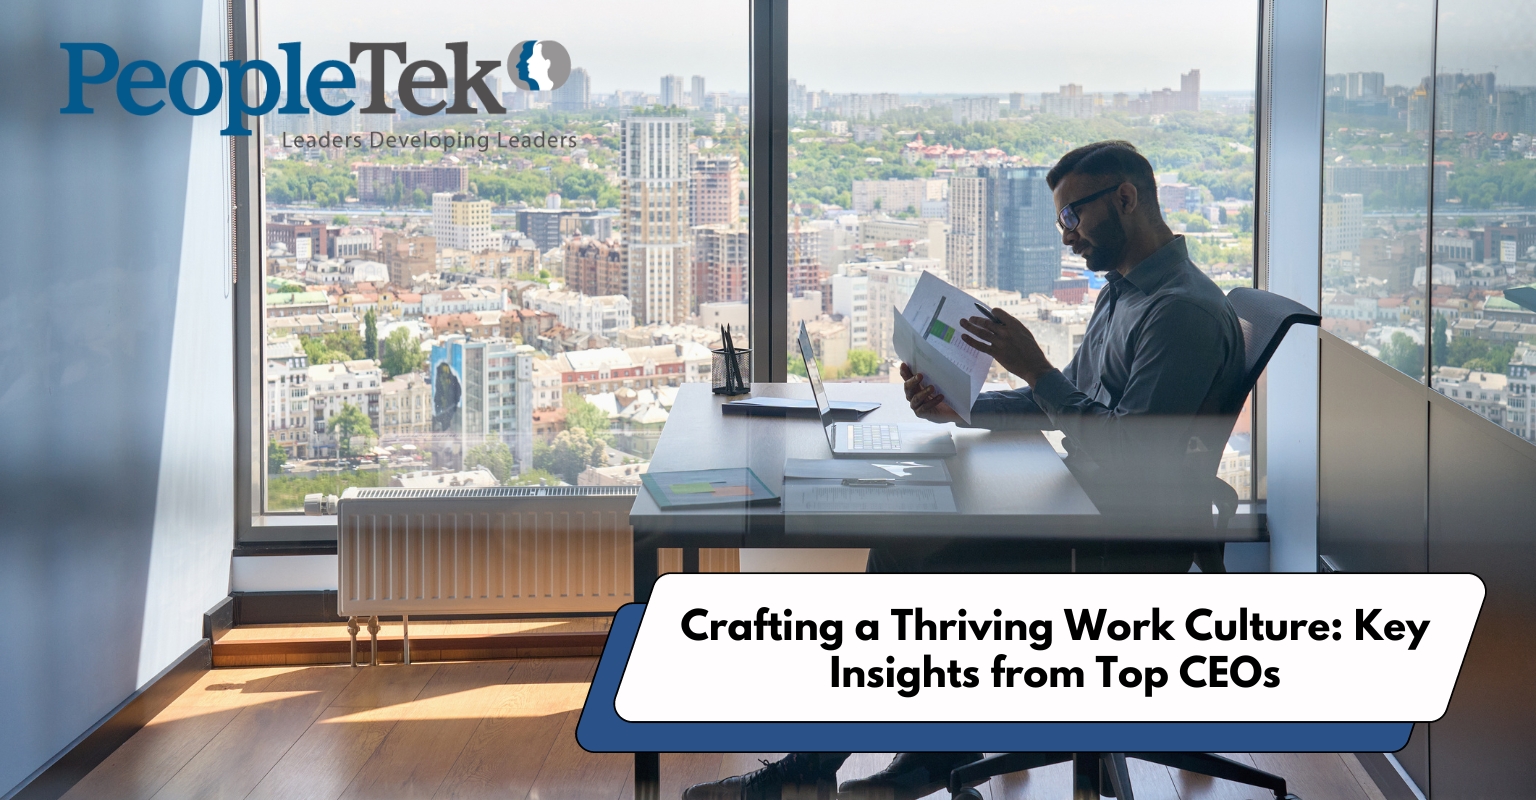 Crafting a Thriving Work Culture: Key Insights from Top CEOs